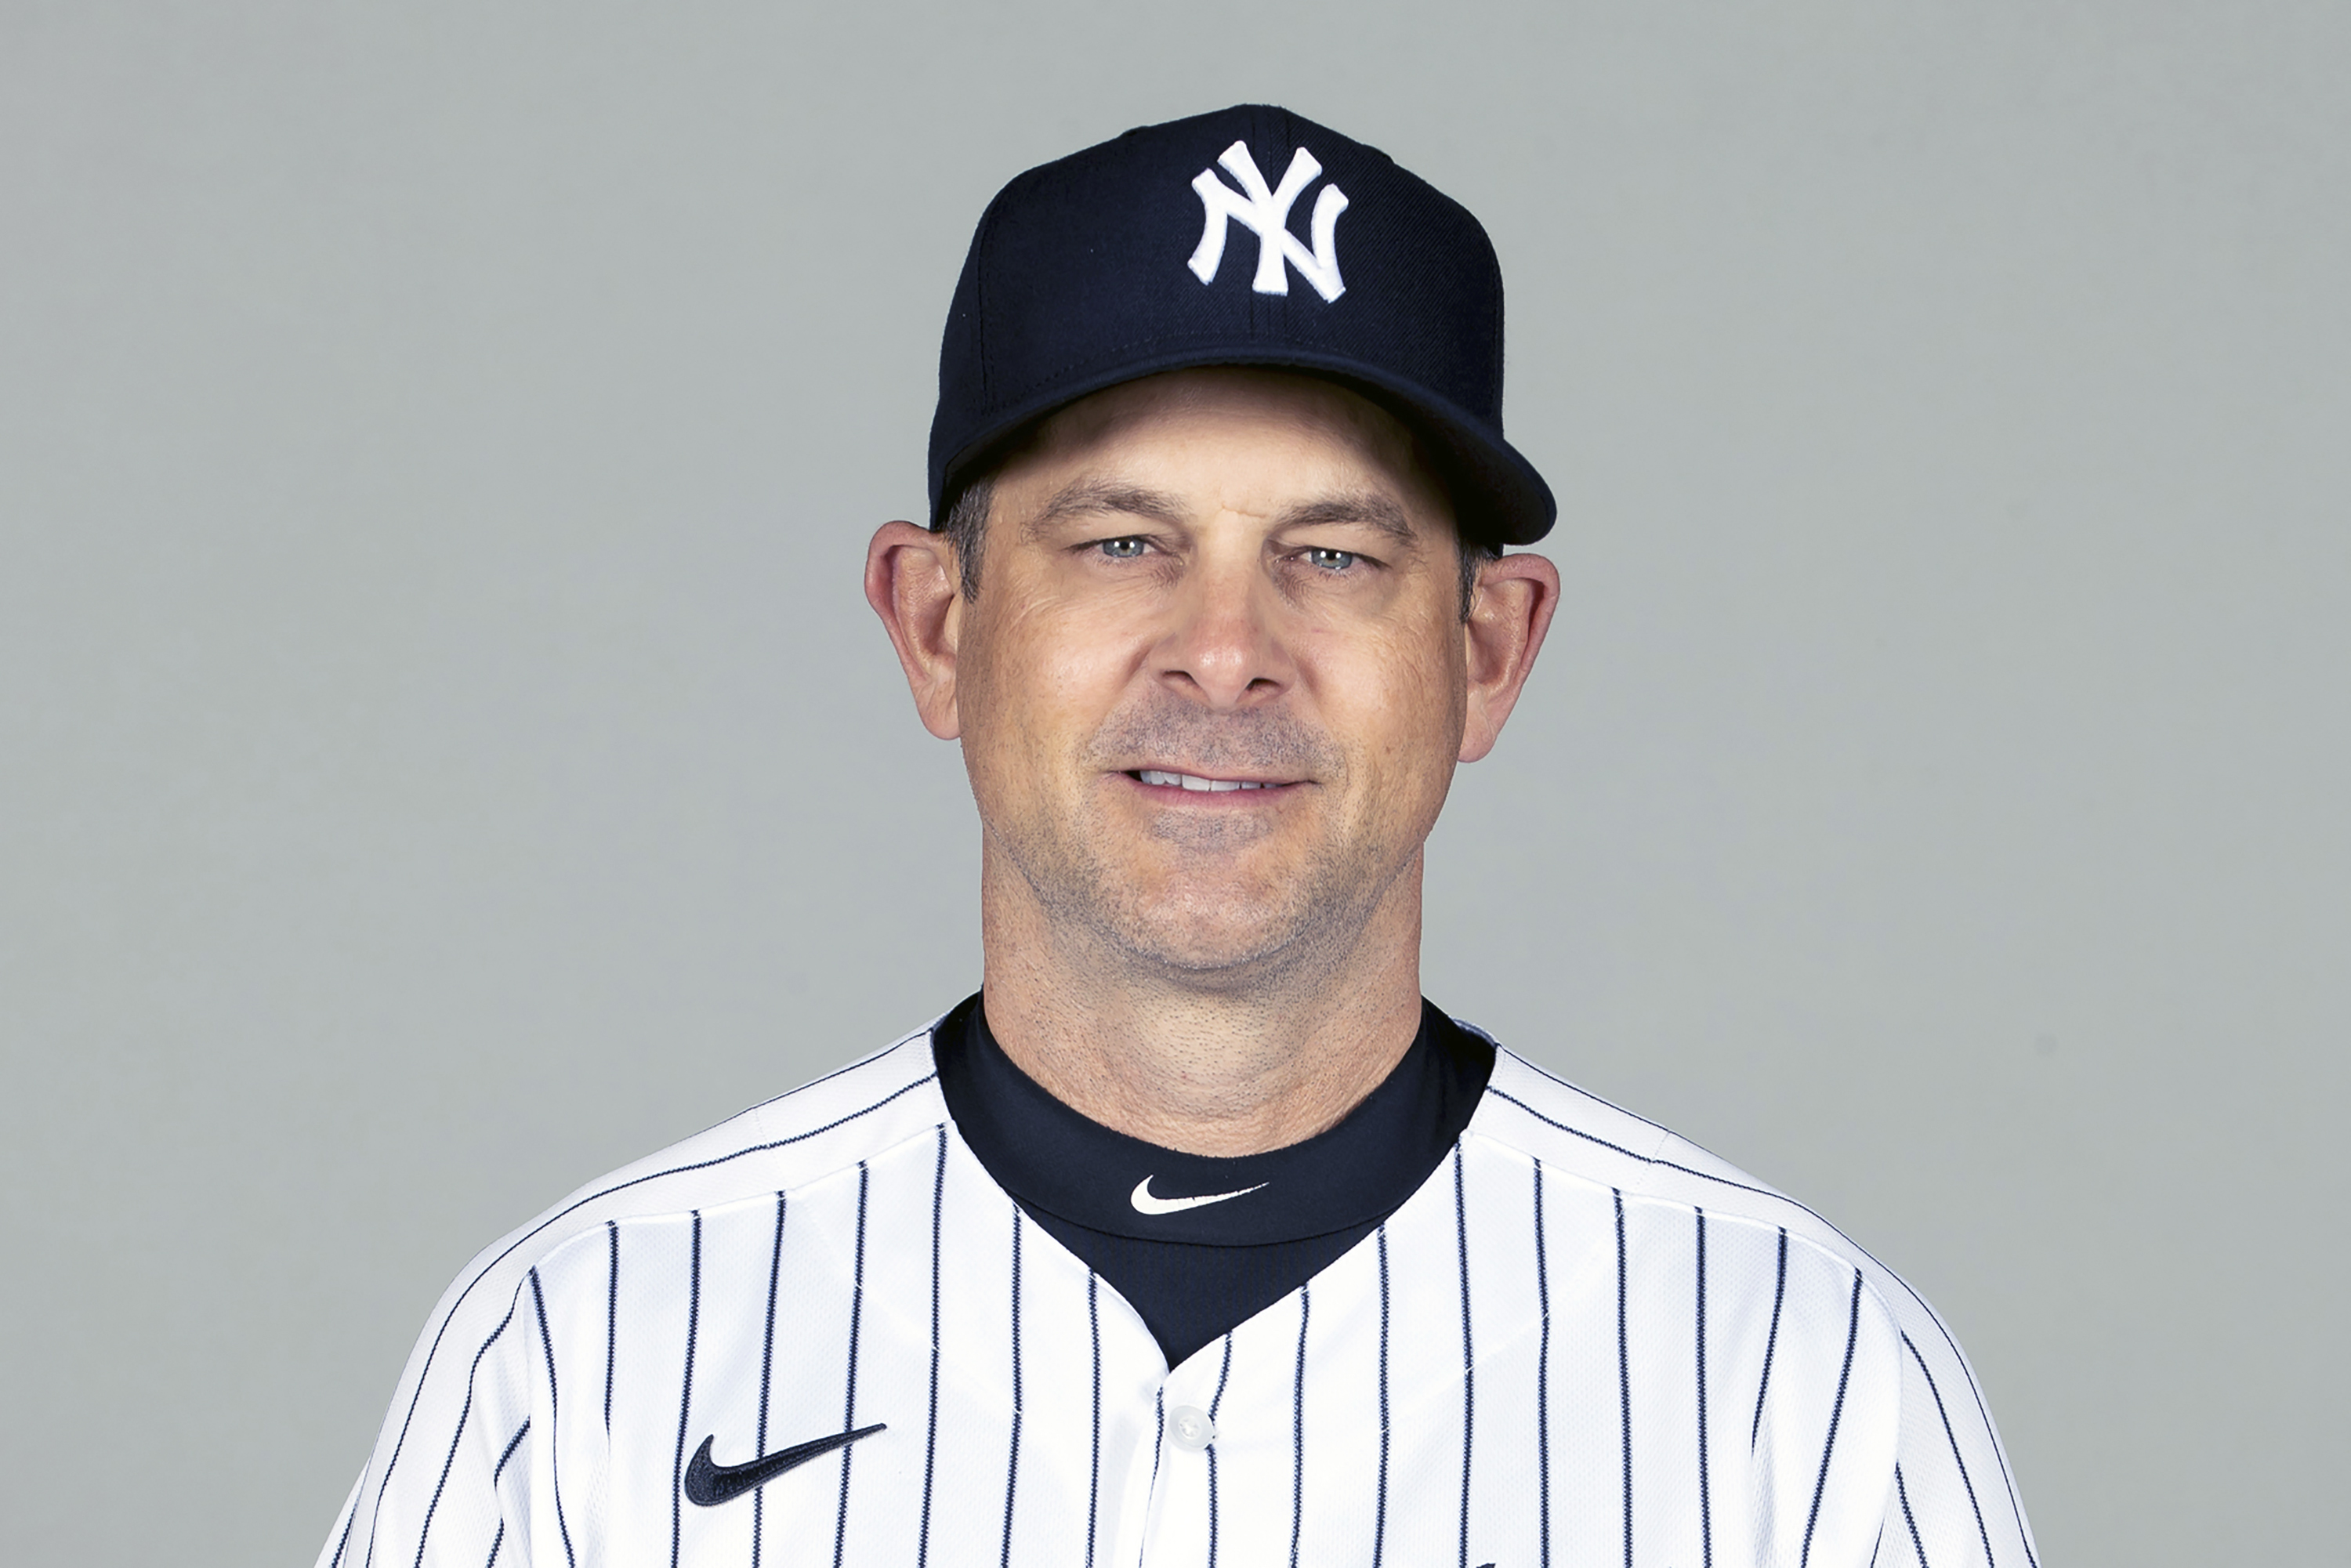 Aaron Boone named manager of the Yankees